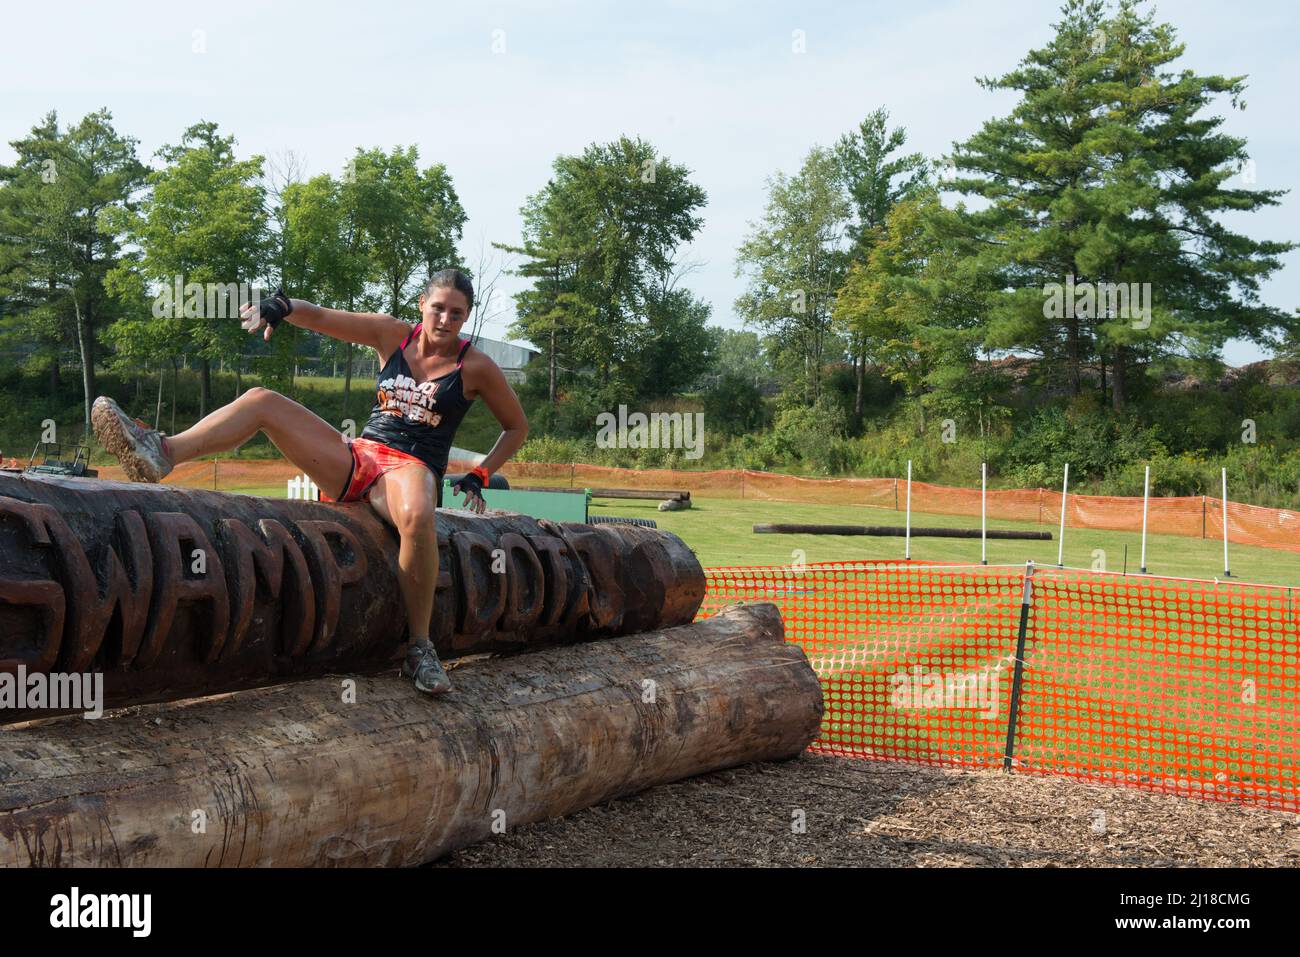 A female competitor makes her way over the log obstacle during the Swampfoot race in St. Clair, Michigan USA. Stock Photo